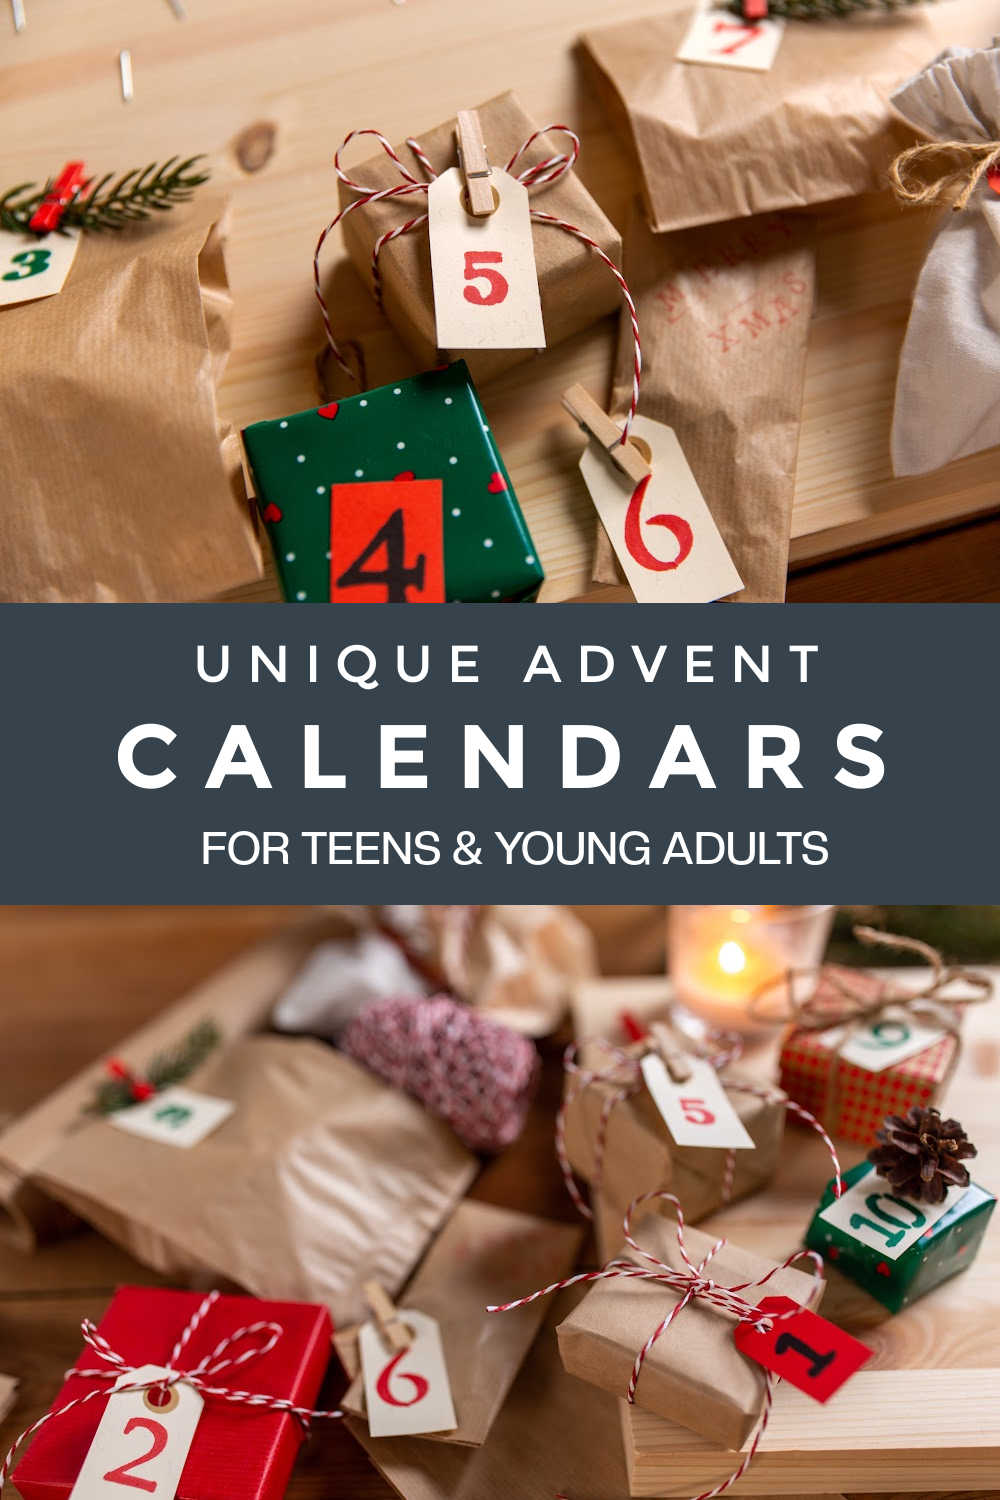 UNIQUE ADVENT CALENDARS FOR TEEN AND YOUNG ADULTS